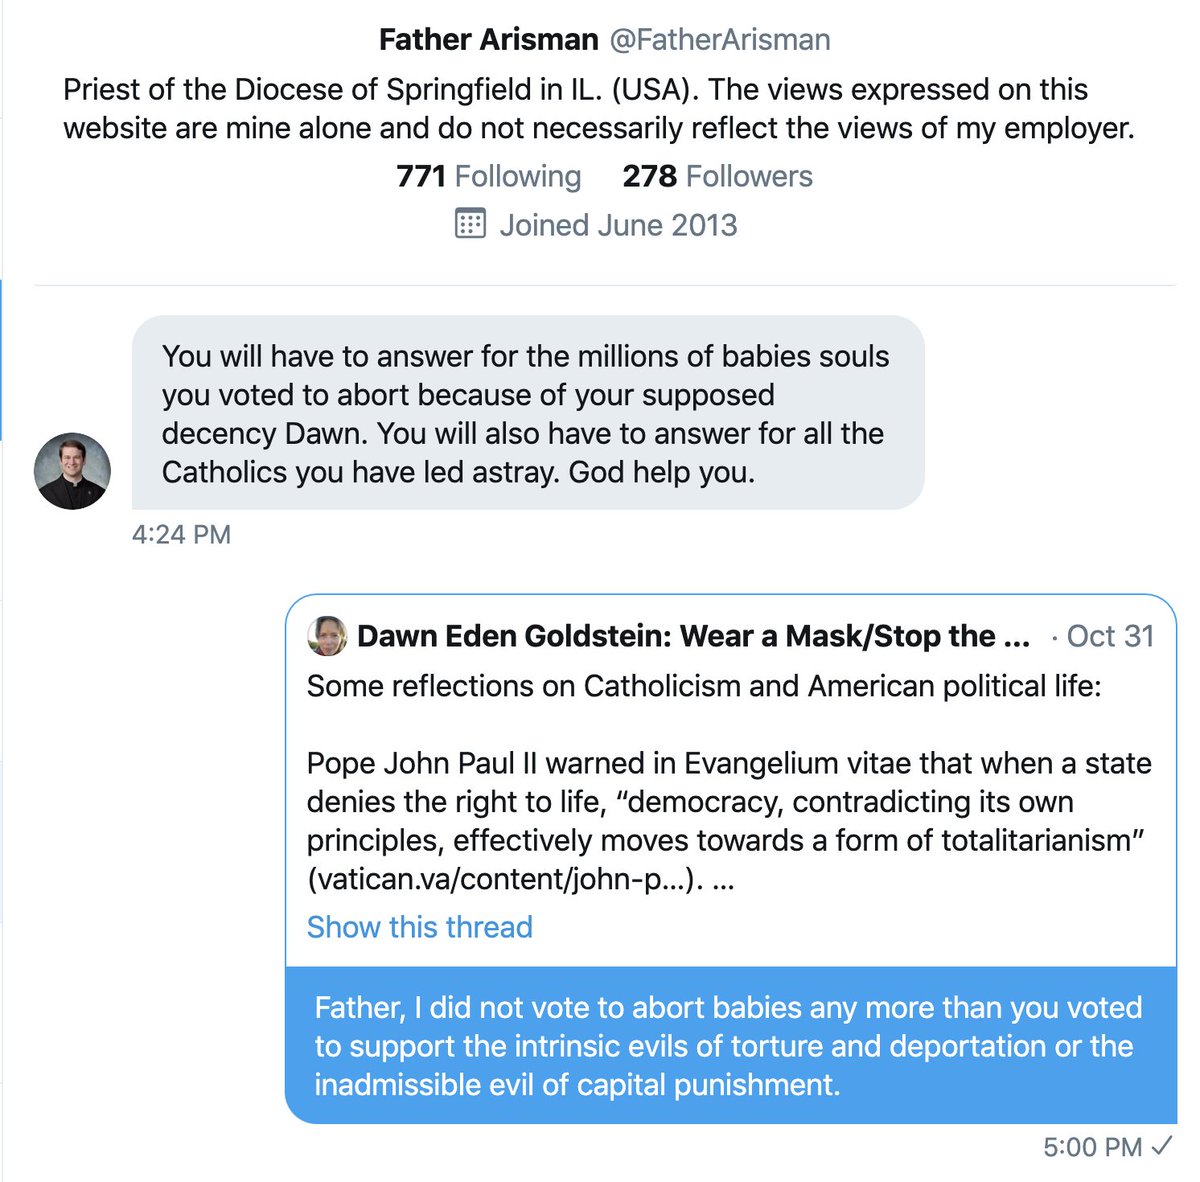 ... This priest and I have never communicated before. He's not my confessor; he doesn't know my heart.I responded, as you can see, citing this thread:  https://twitter.com/DawnofMercy/status/1322693356552626177. My hope was to take his unprovoked condemnation as an opportunity for private dialogue. ...